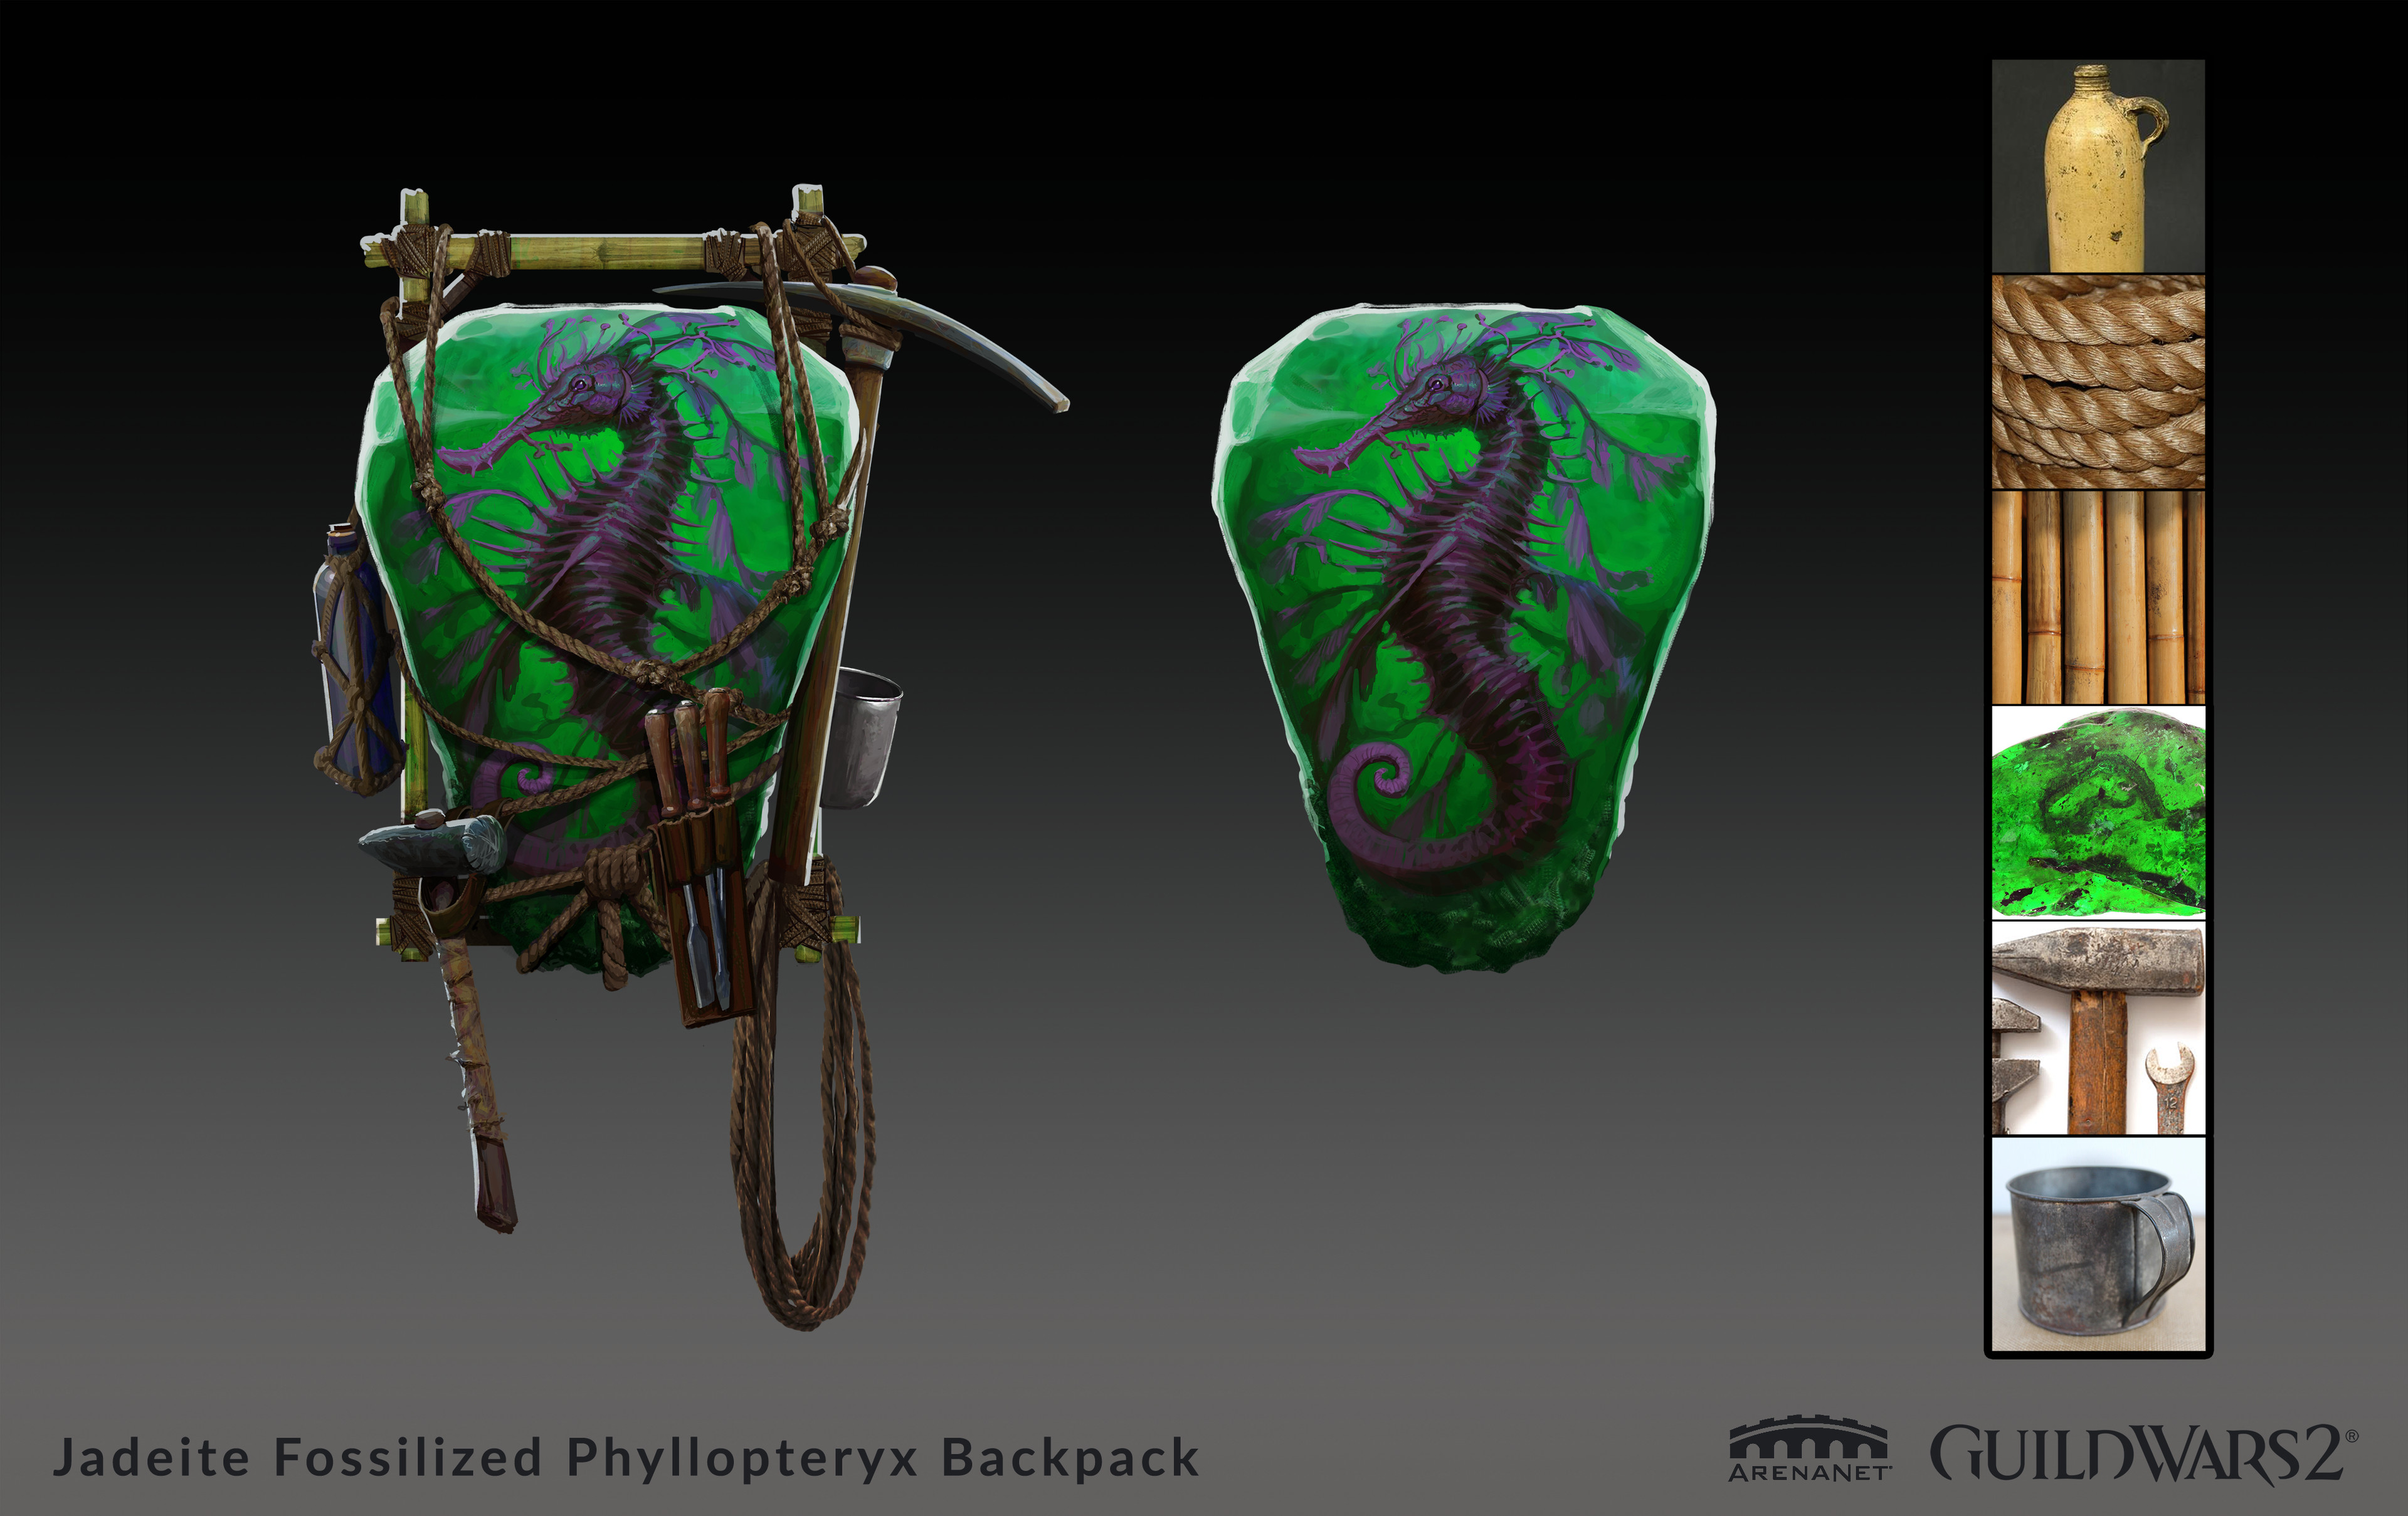 Jade fossil backpack concept